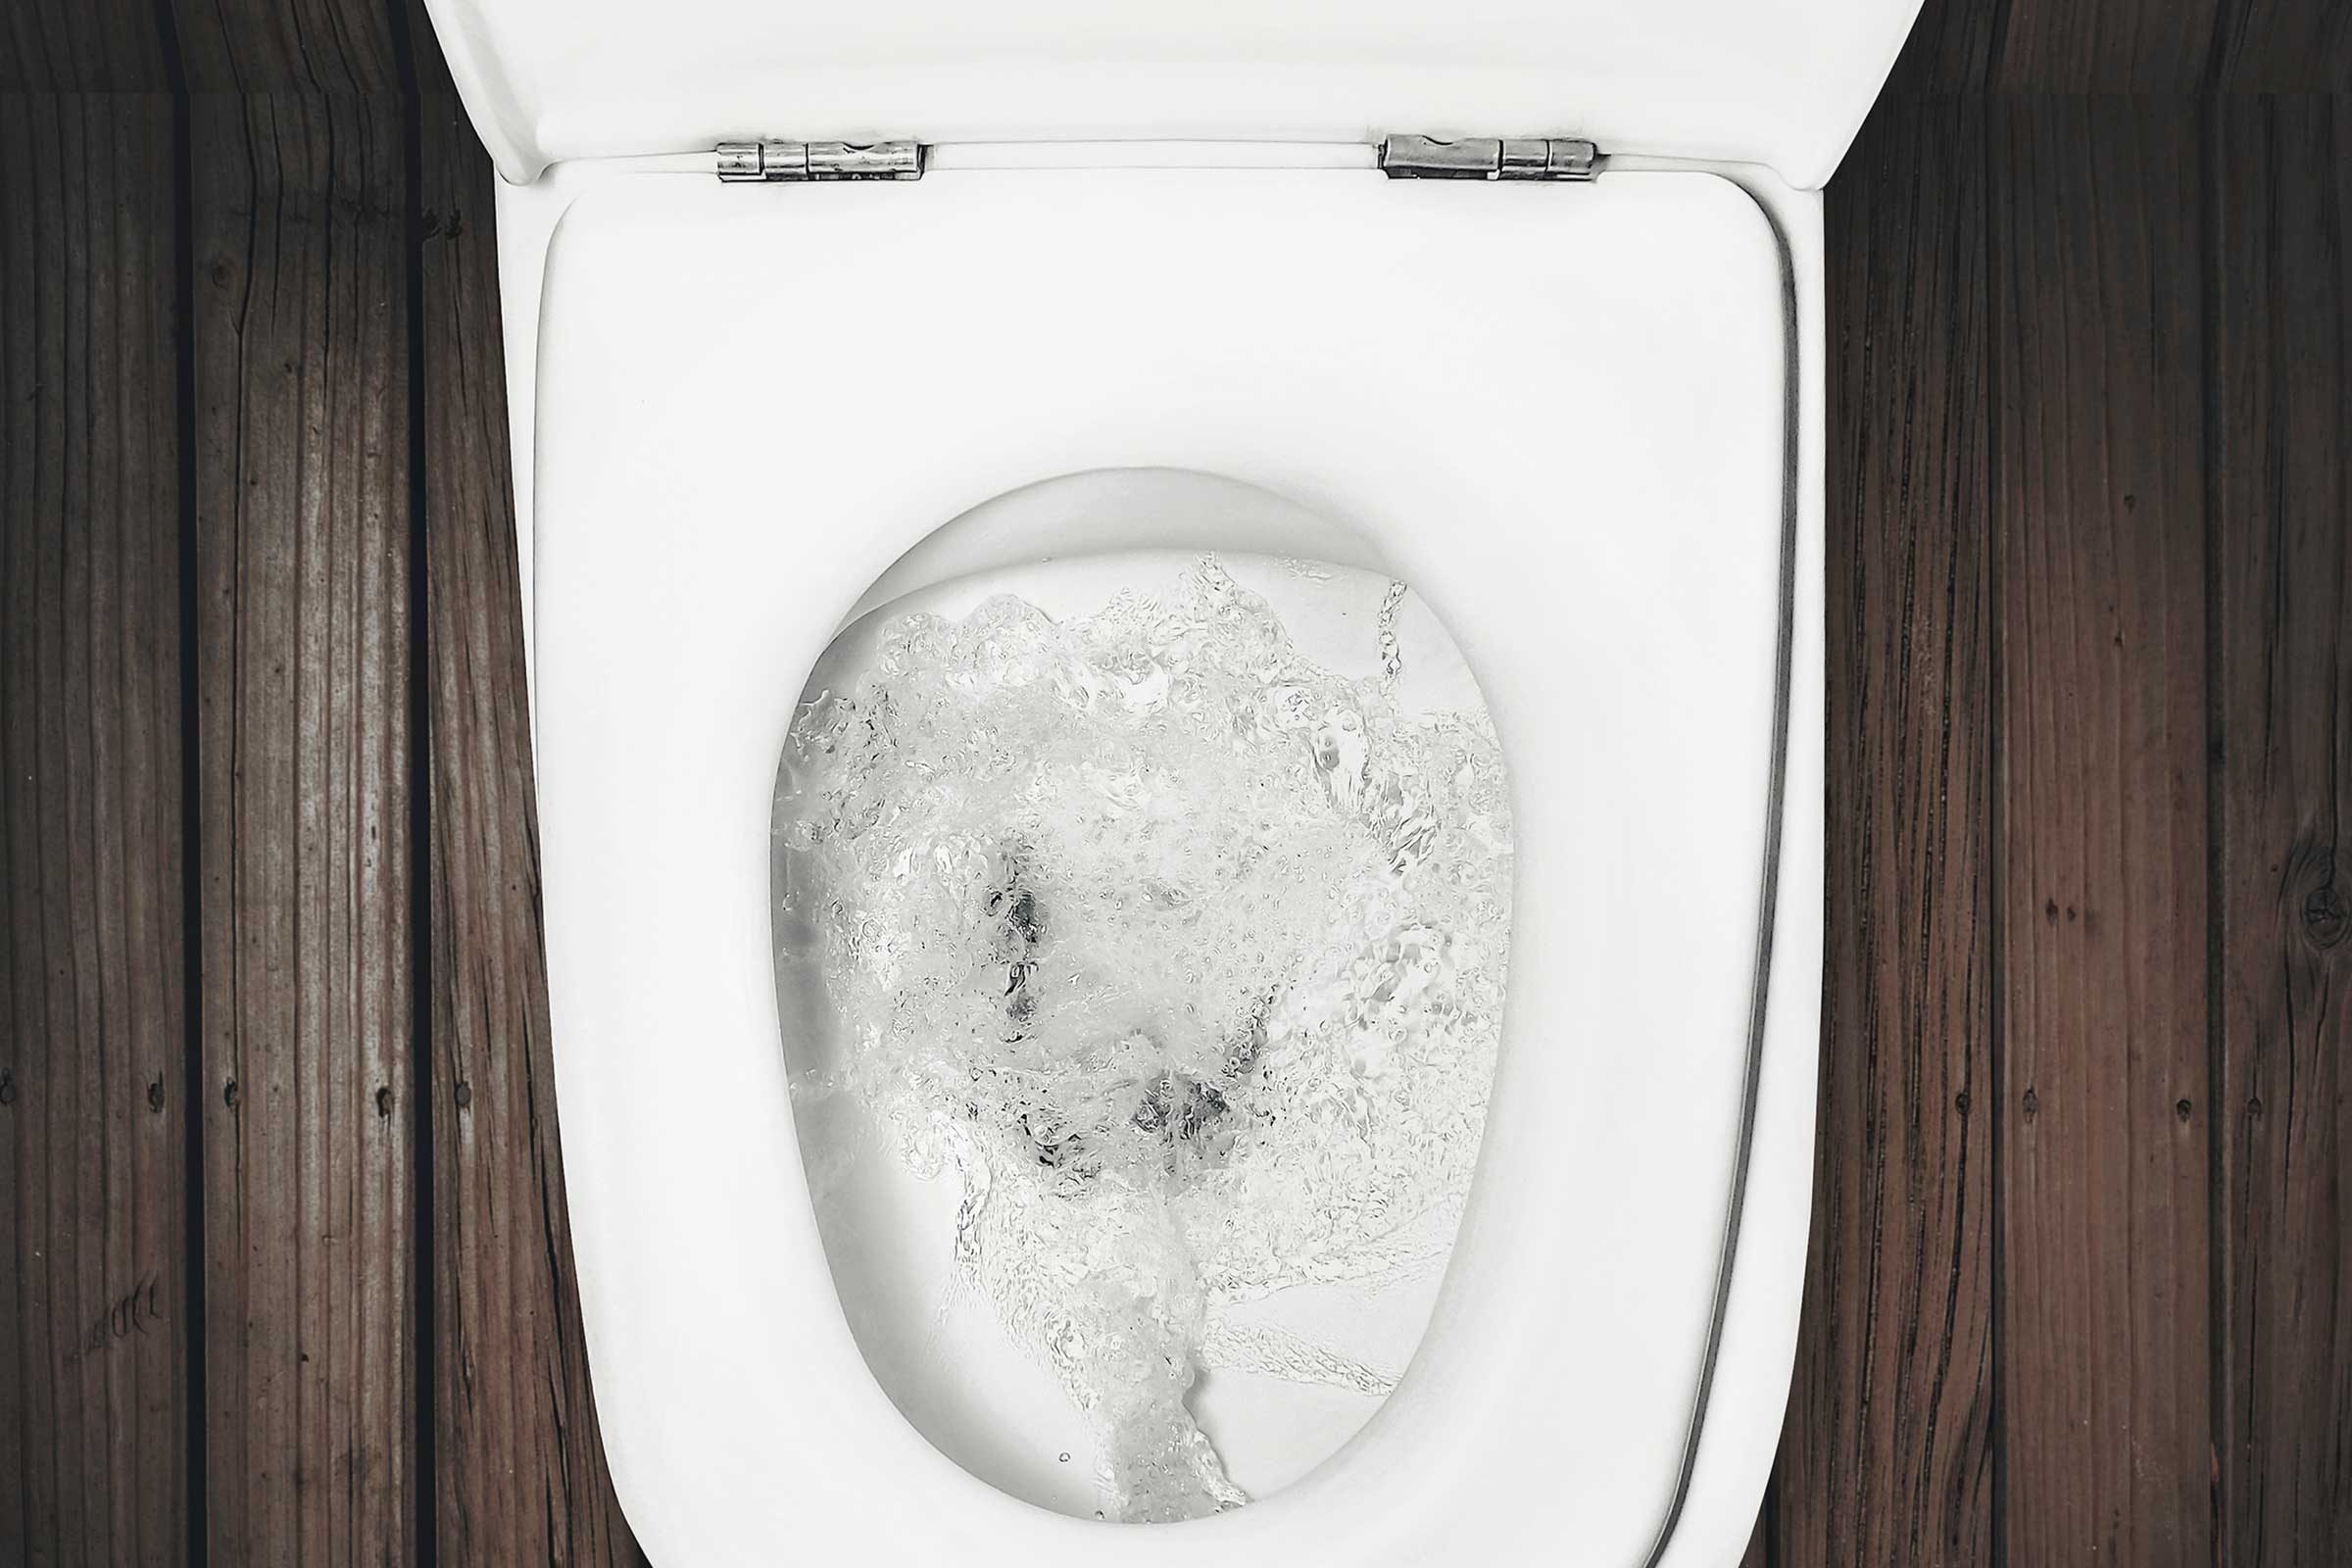 10 Ways You Never Knew You Were Using the Toilet Wrong